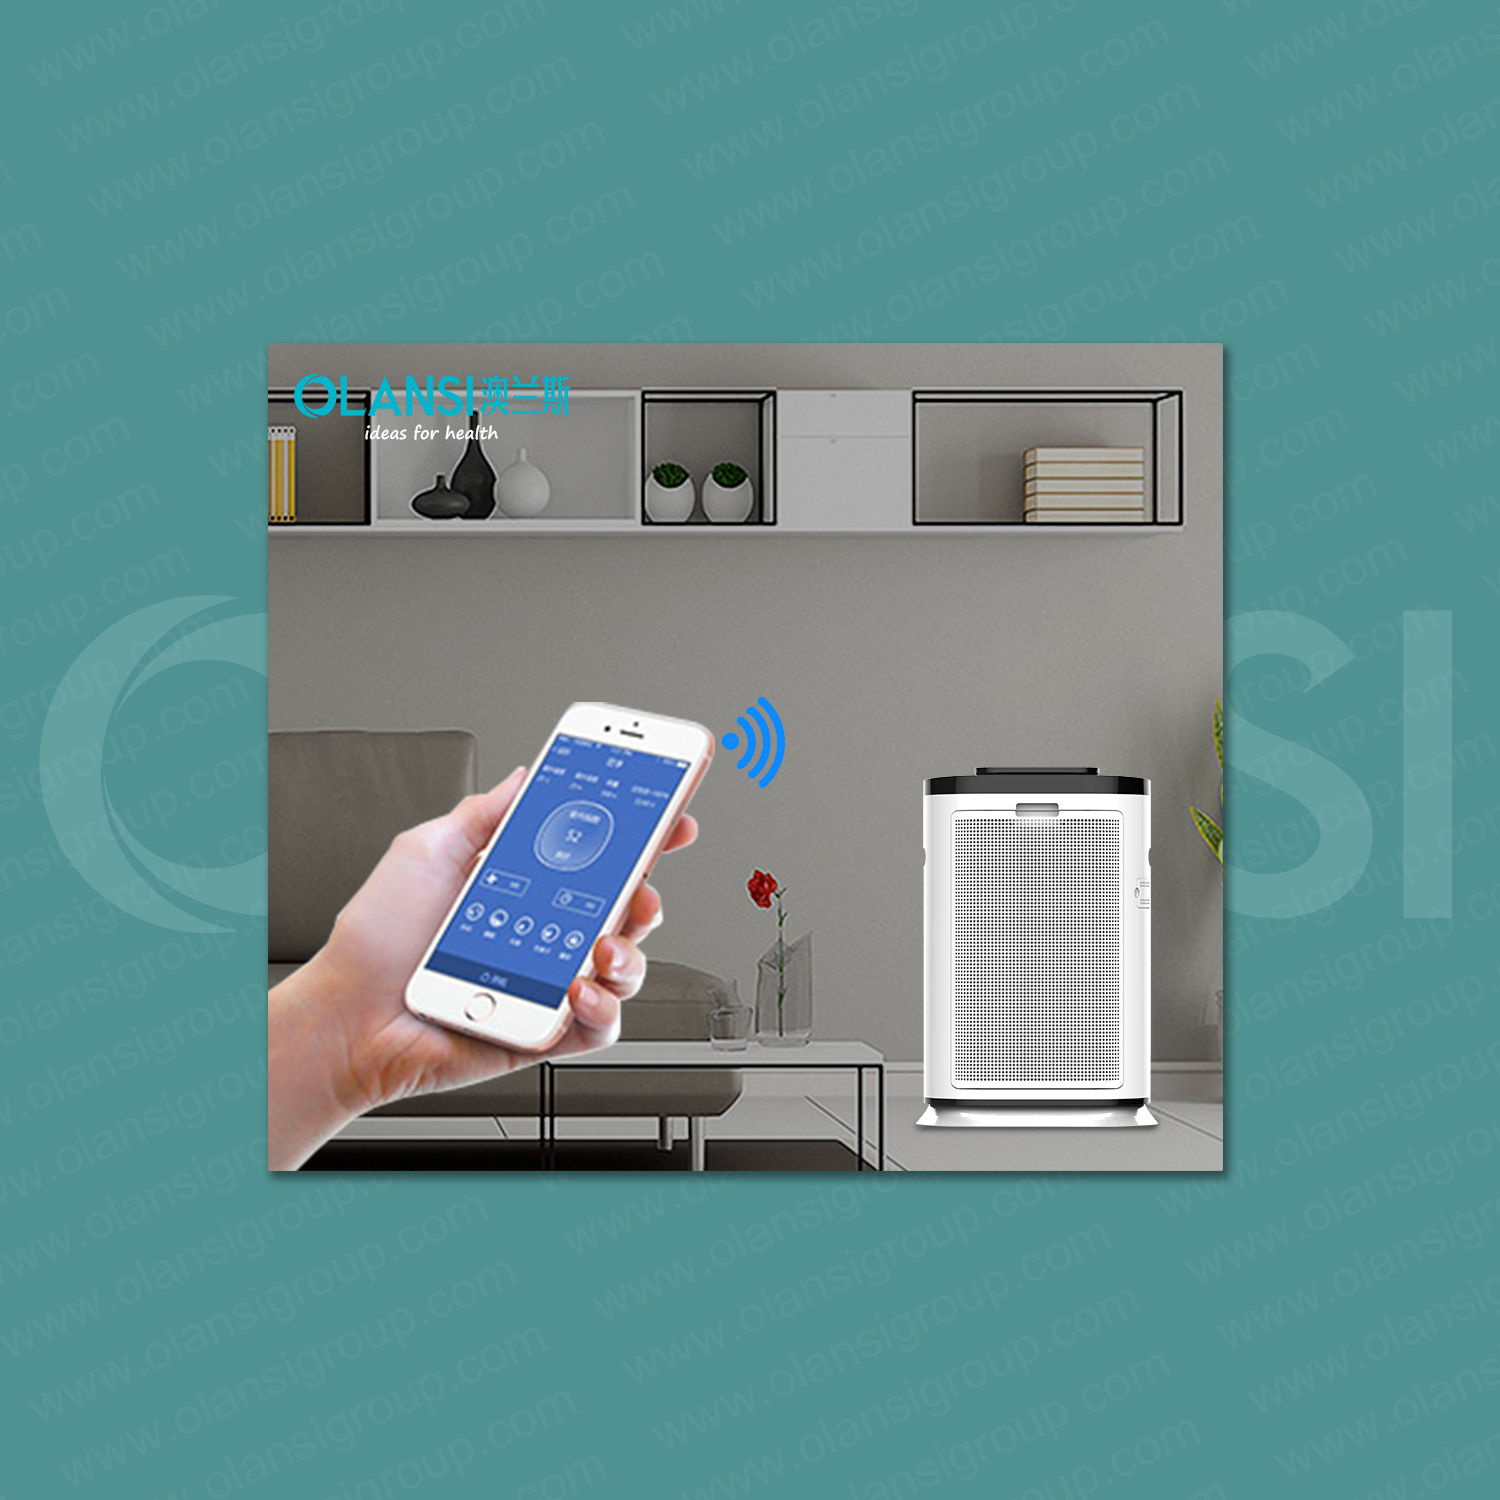 How to link your phone to the air purifier?